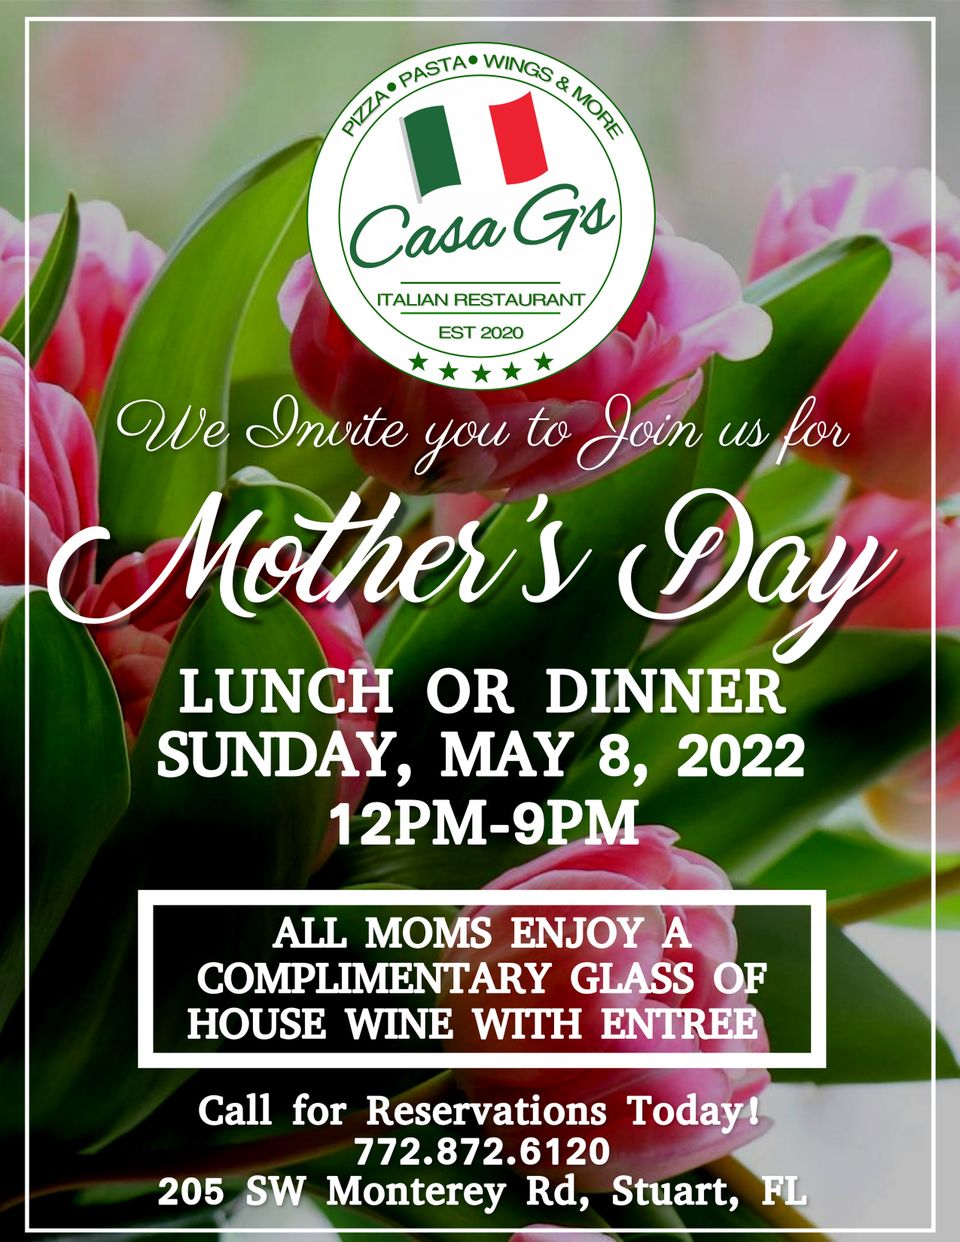 Casa g's mother's day 2022